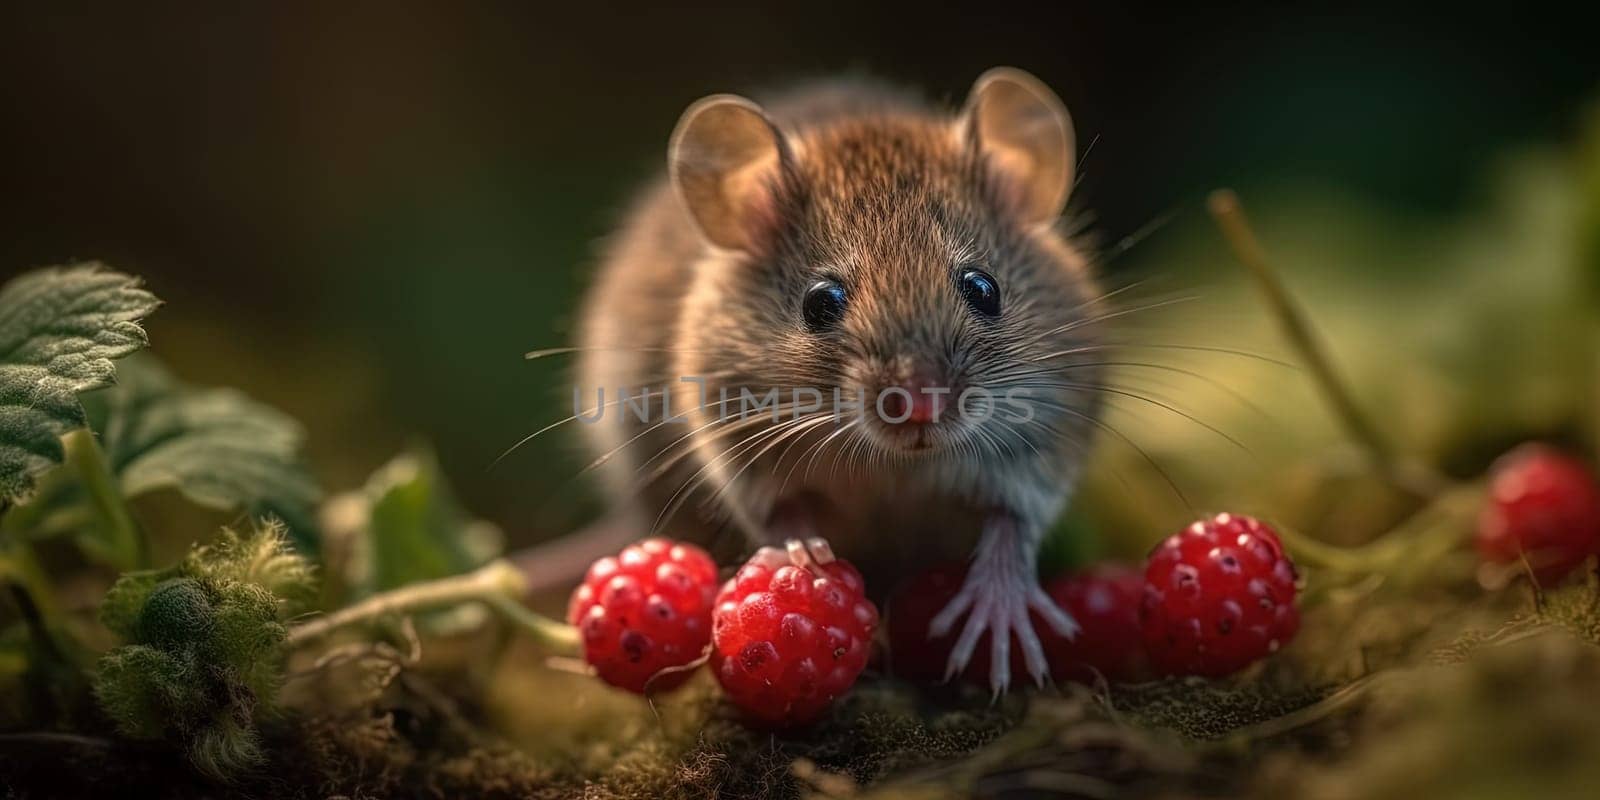 Wild Grey Mouse Eating Fresh Raspberry In The Forest, Animal In Natural Habitat